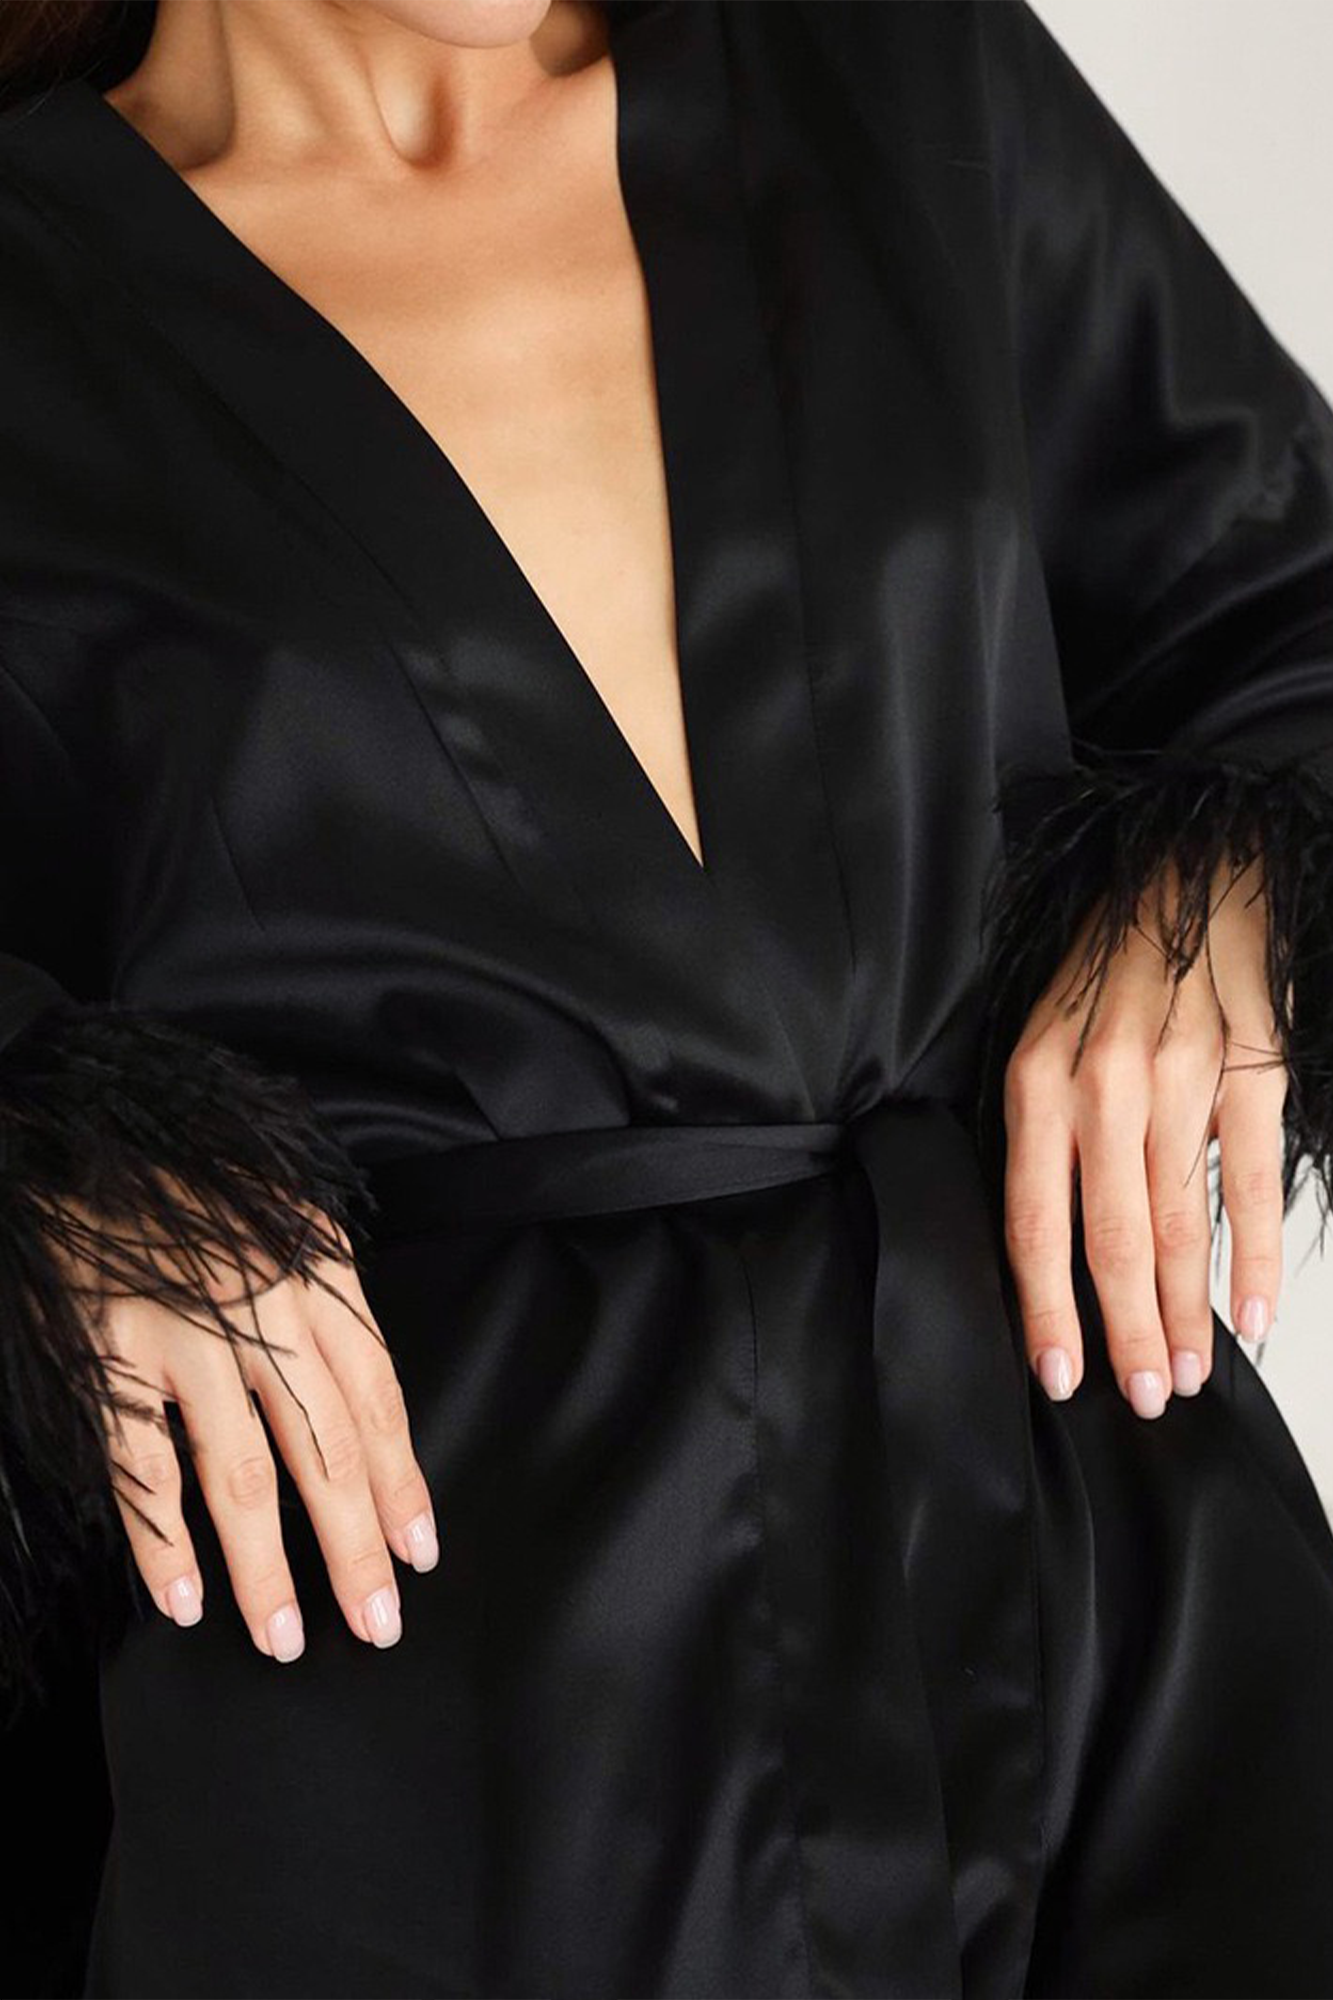 Black Satin Robe with Feather